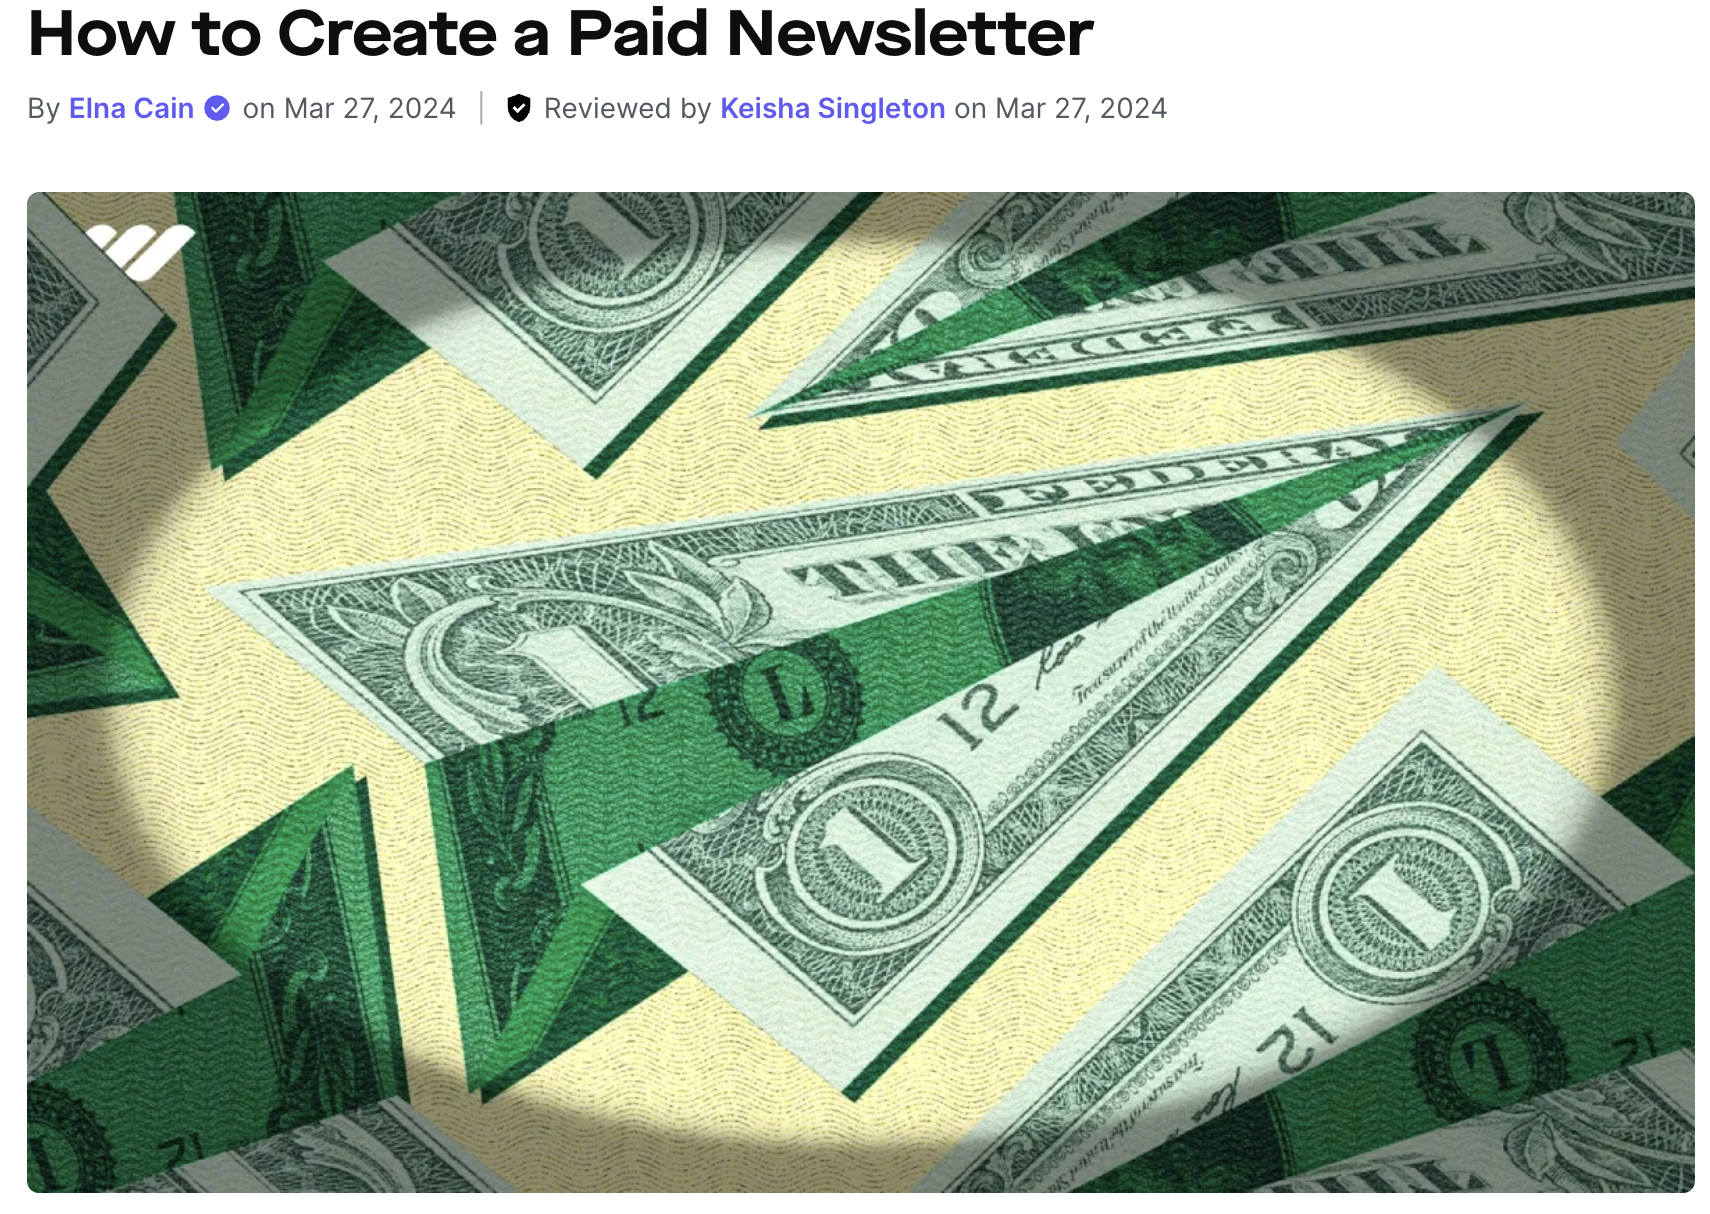 How to Create a Paid Newsletter